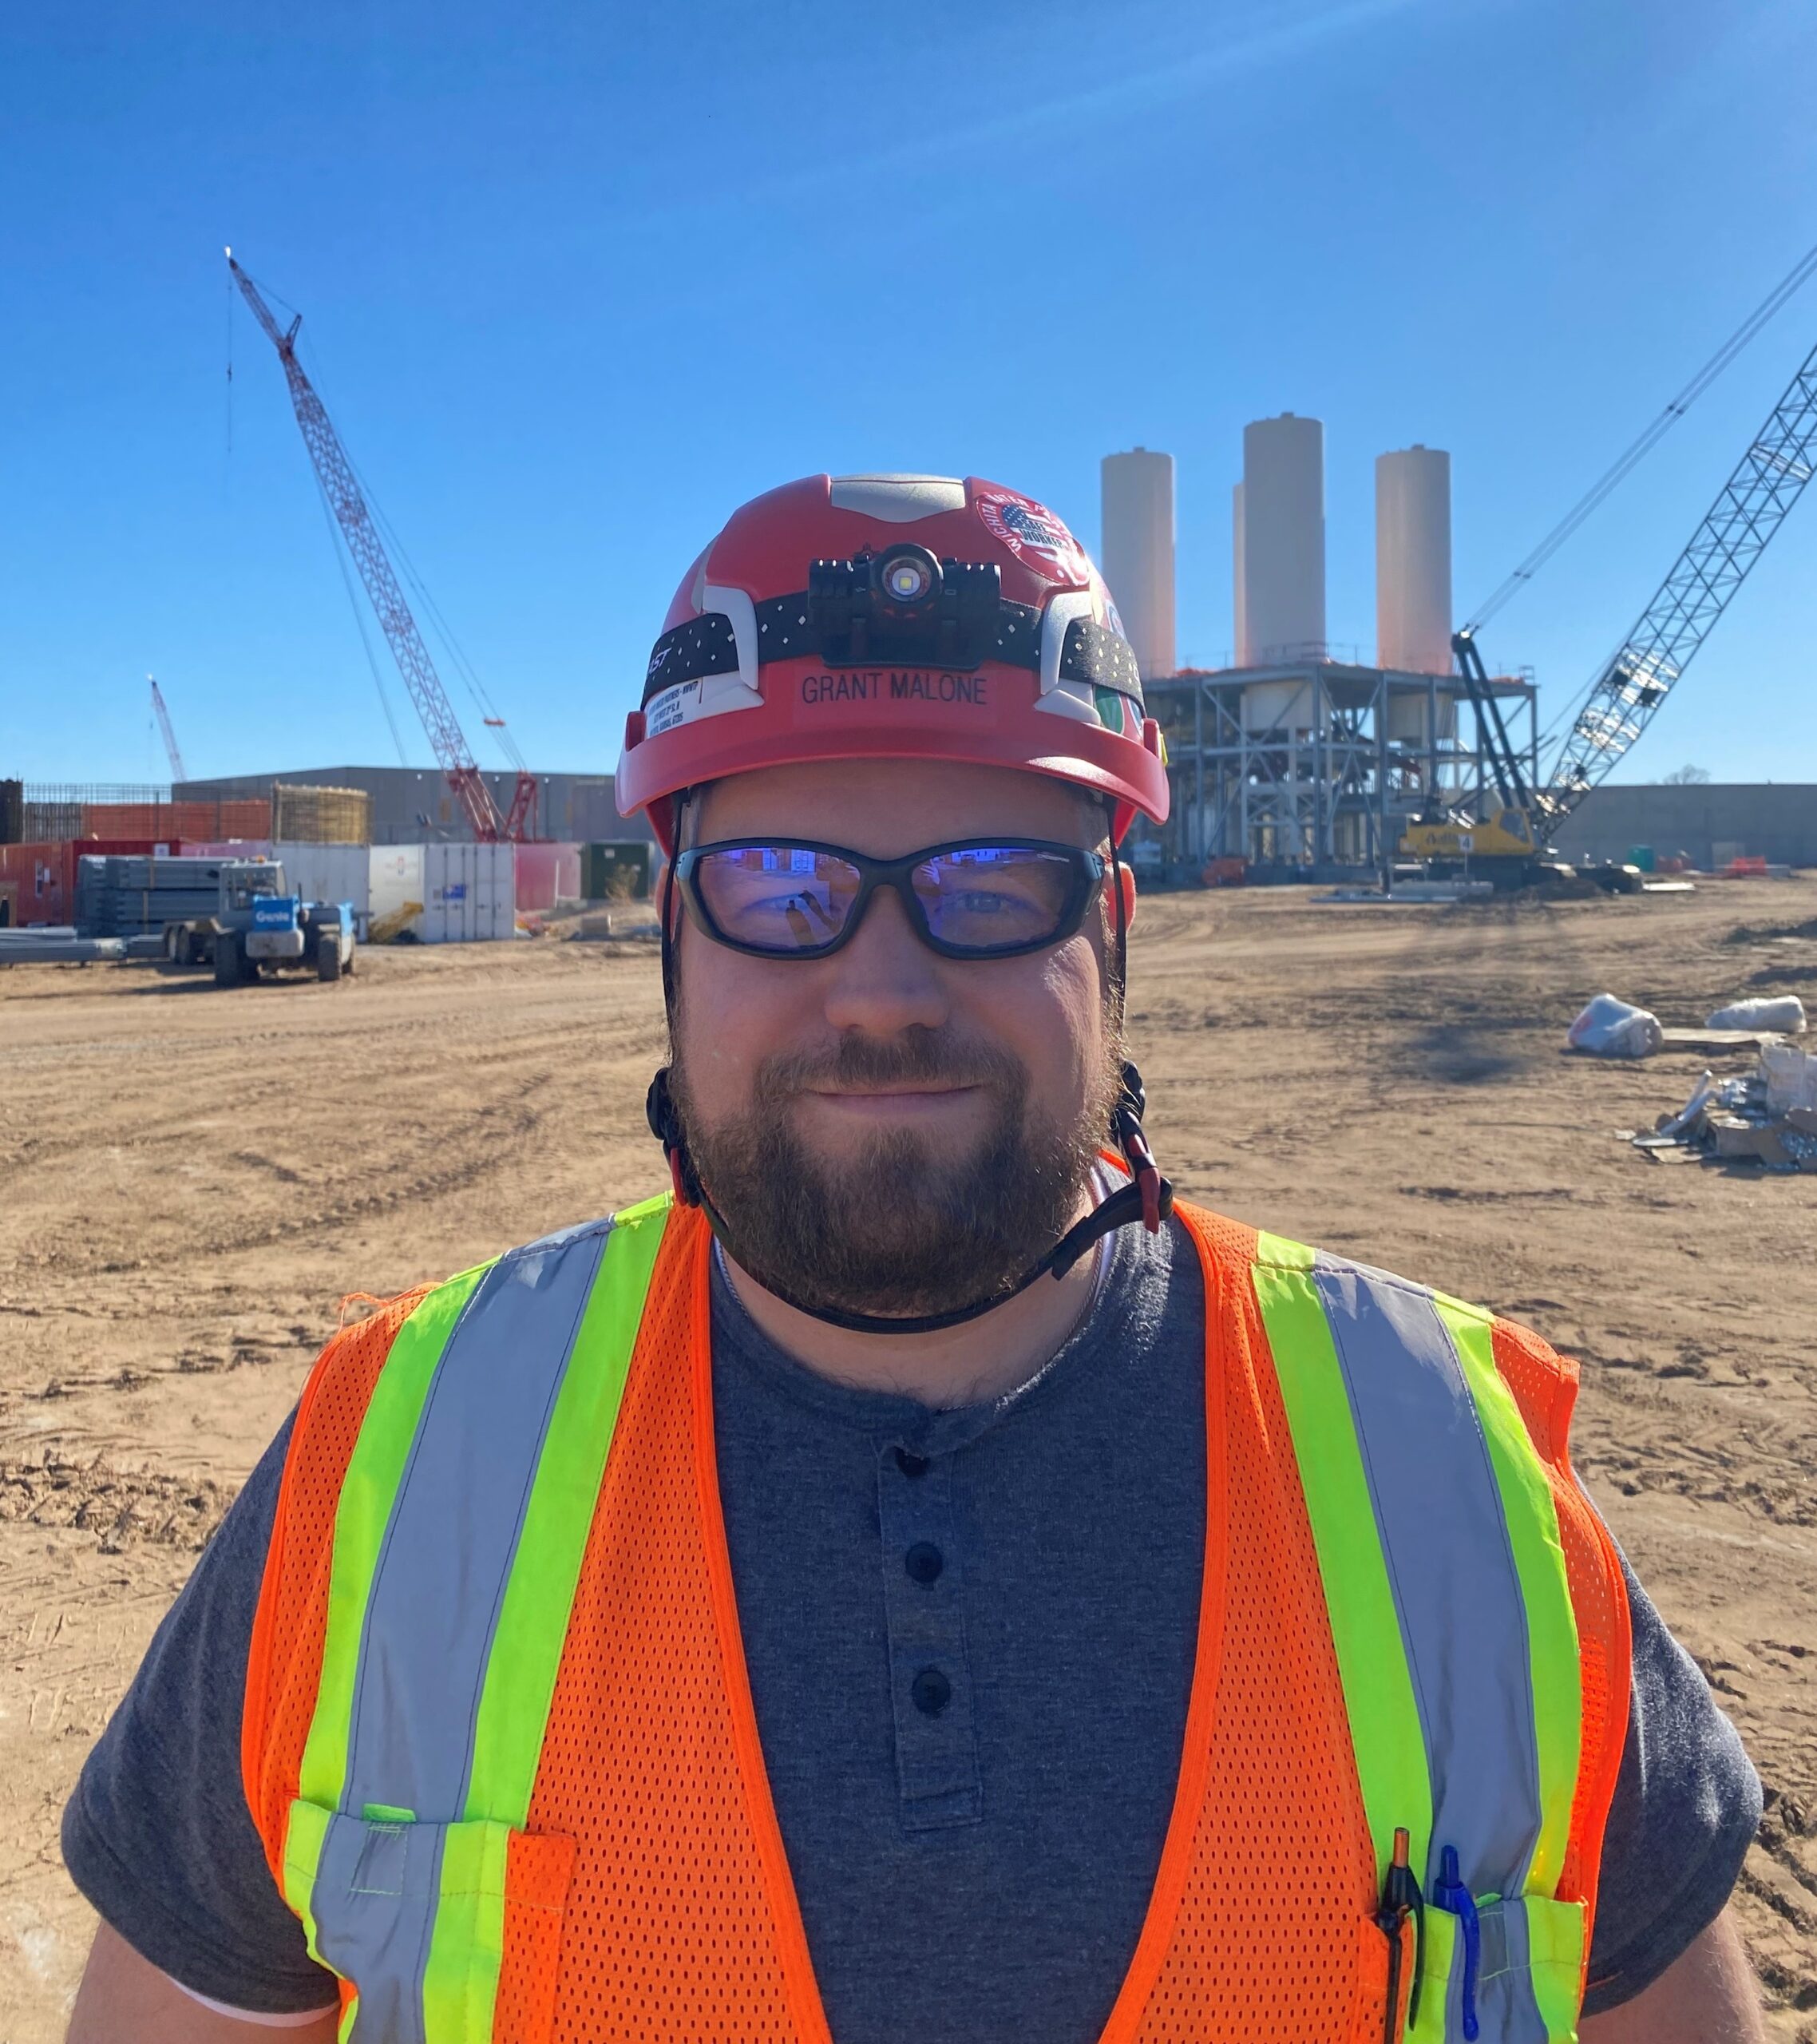 Project Manager Grant Malone wears a hard hat, safety goggles and a neon orange and yellow safety vest on site at Wichita’s Northwest Water Facility.